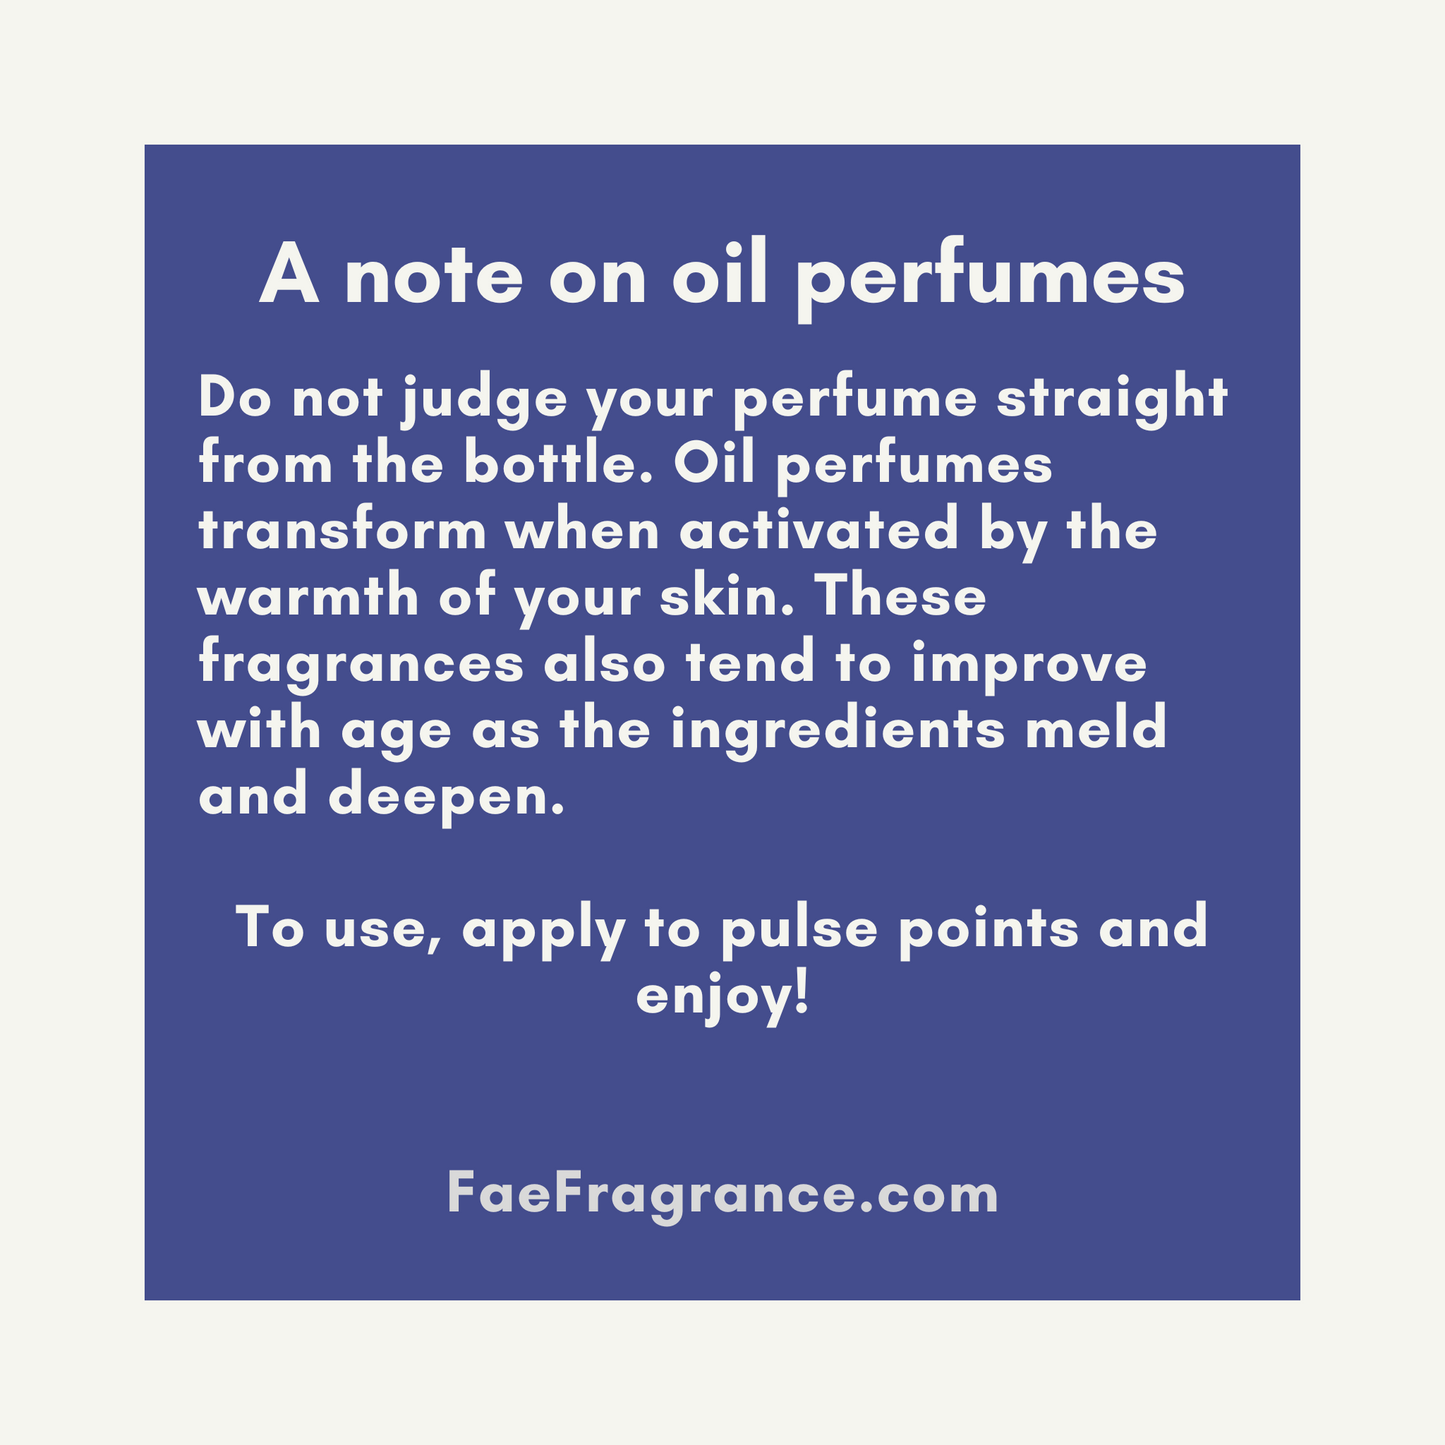 About oil perfumes